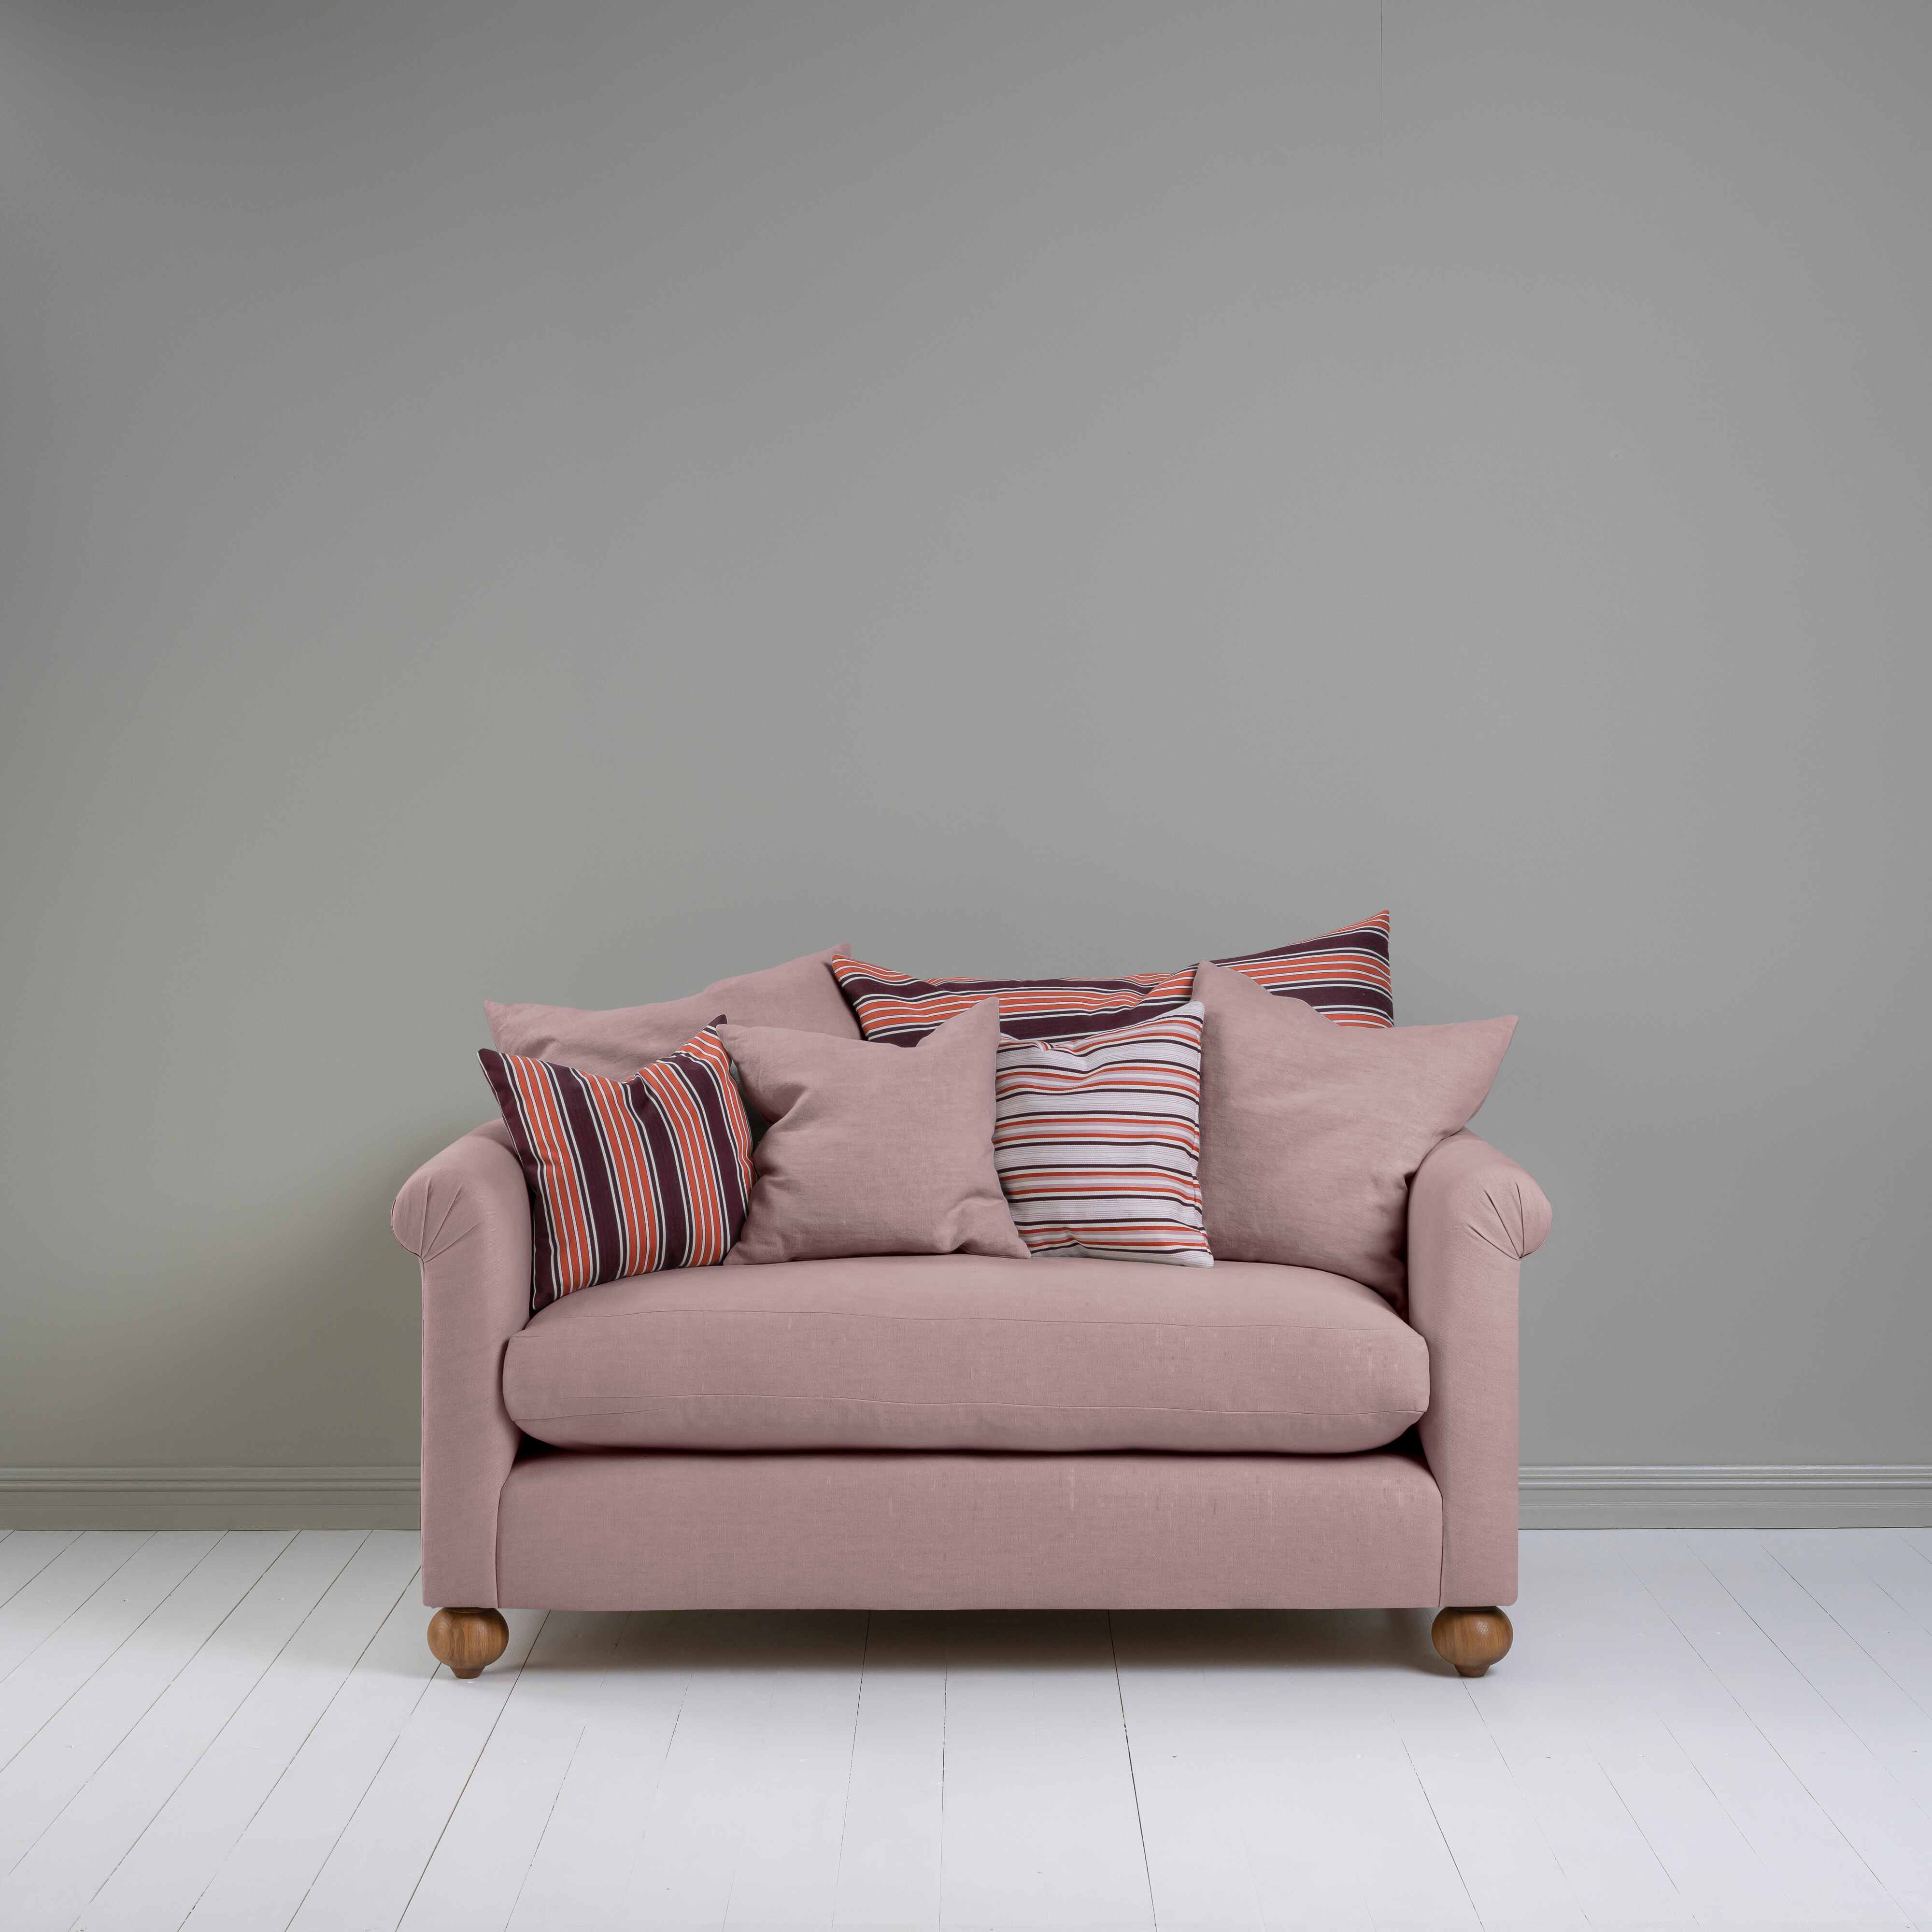  Dolittle 2 Seater Sofa in Laidback Linen Heather 